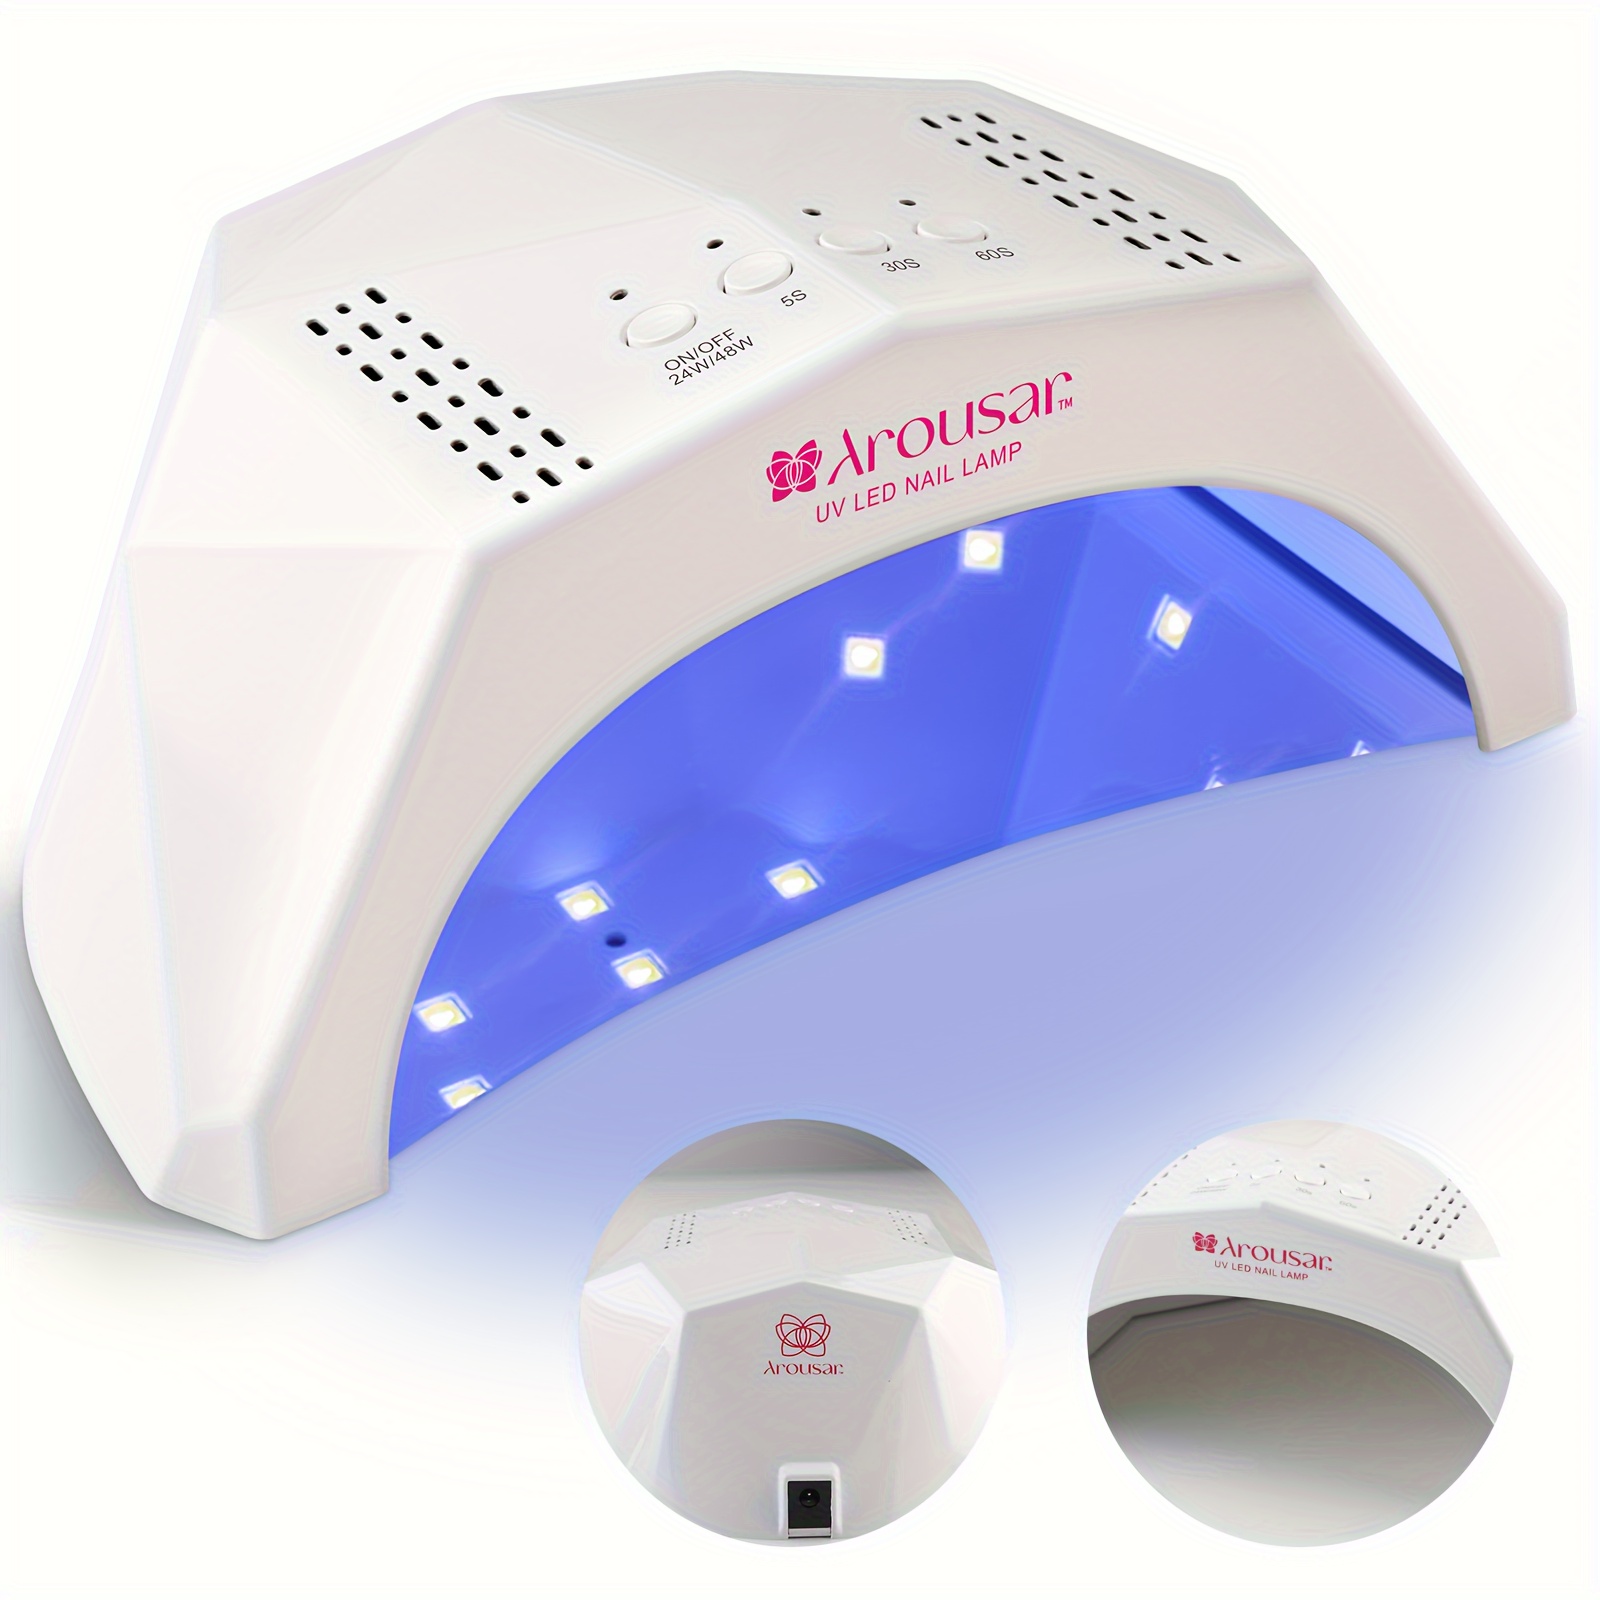 

Professional Nail Lamp, Uv Led Nail Dryer For Gel Polish, With 30pcs Double Light Beads, 3-timer Setting, Heat Dissipation Hole Design, Nail Art Curing Light, Non-harmful, Skin-friendly